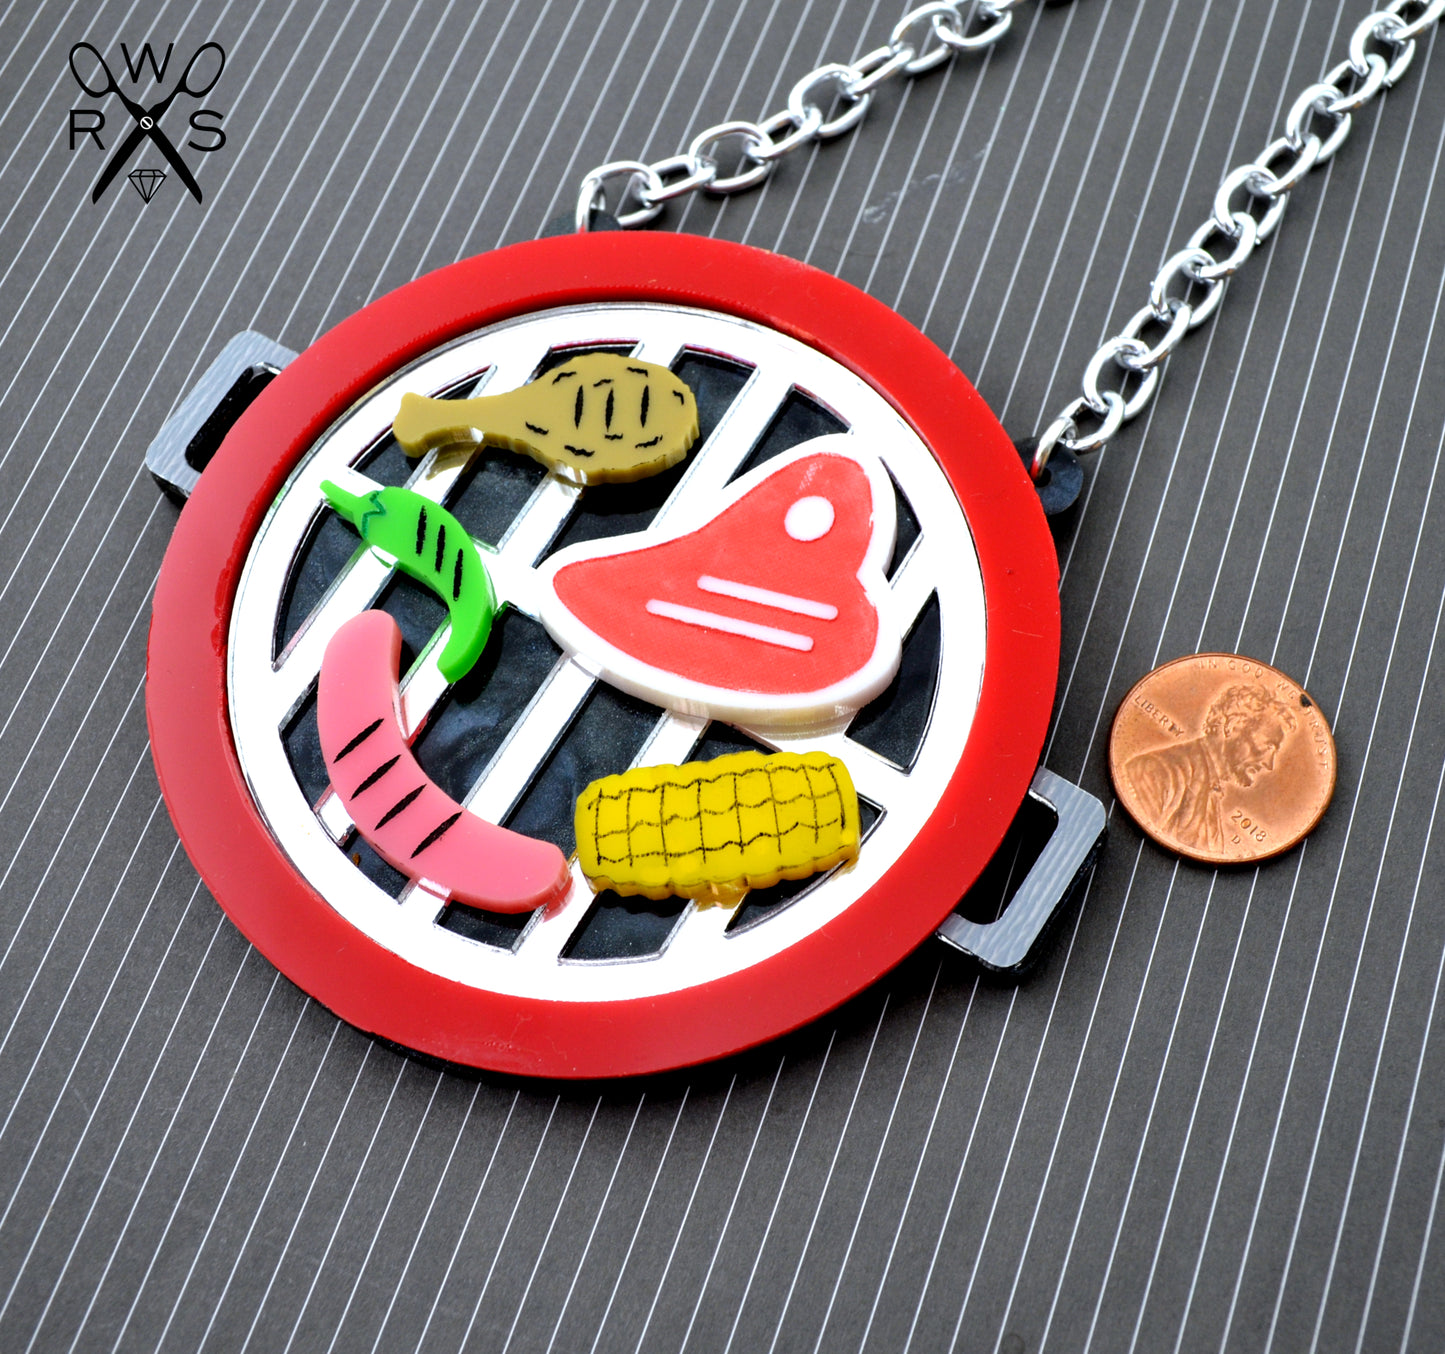 Damn Grill, You're HOT!  - Laser Cut Acrylic Statement Necklace